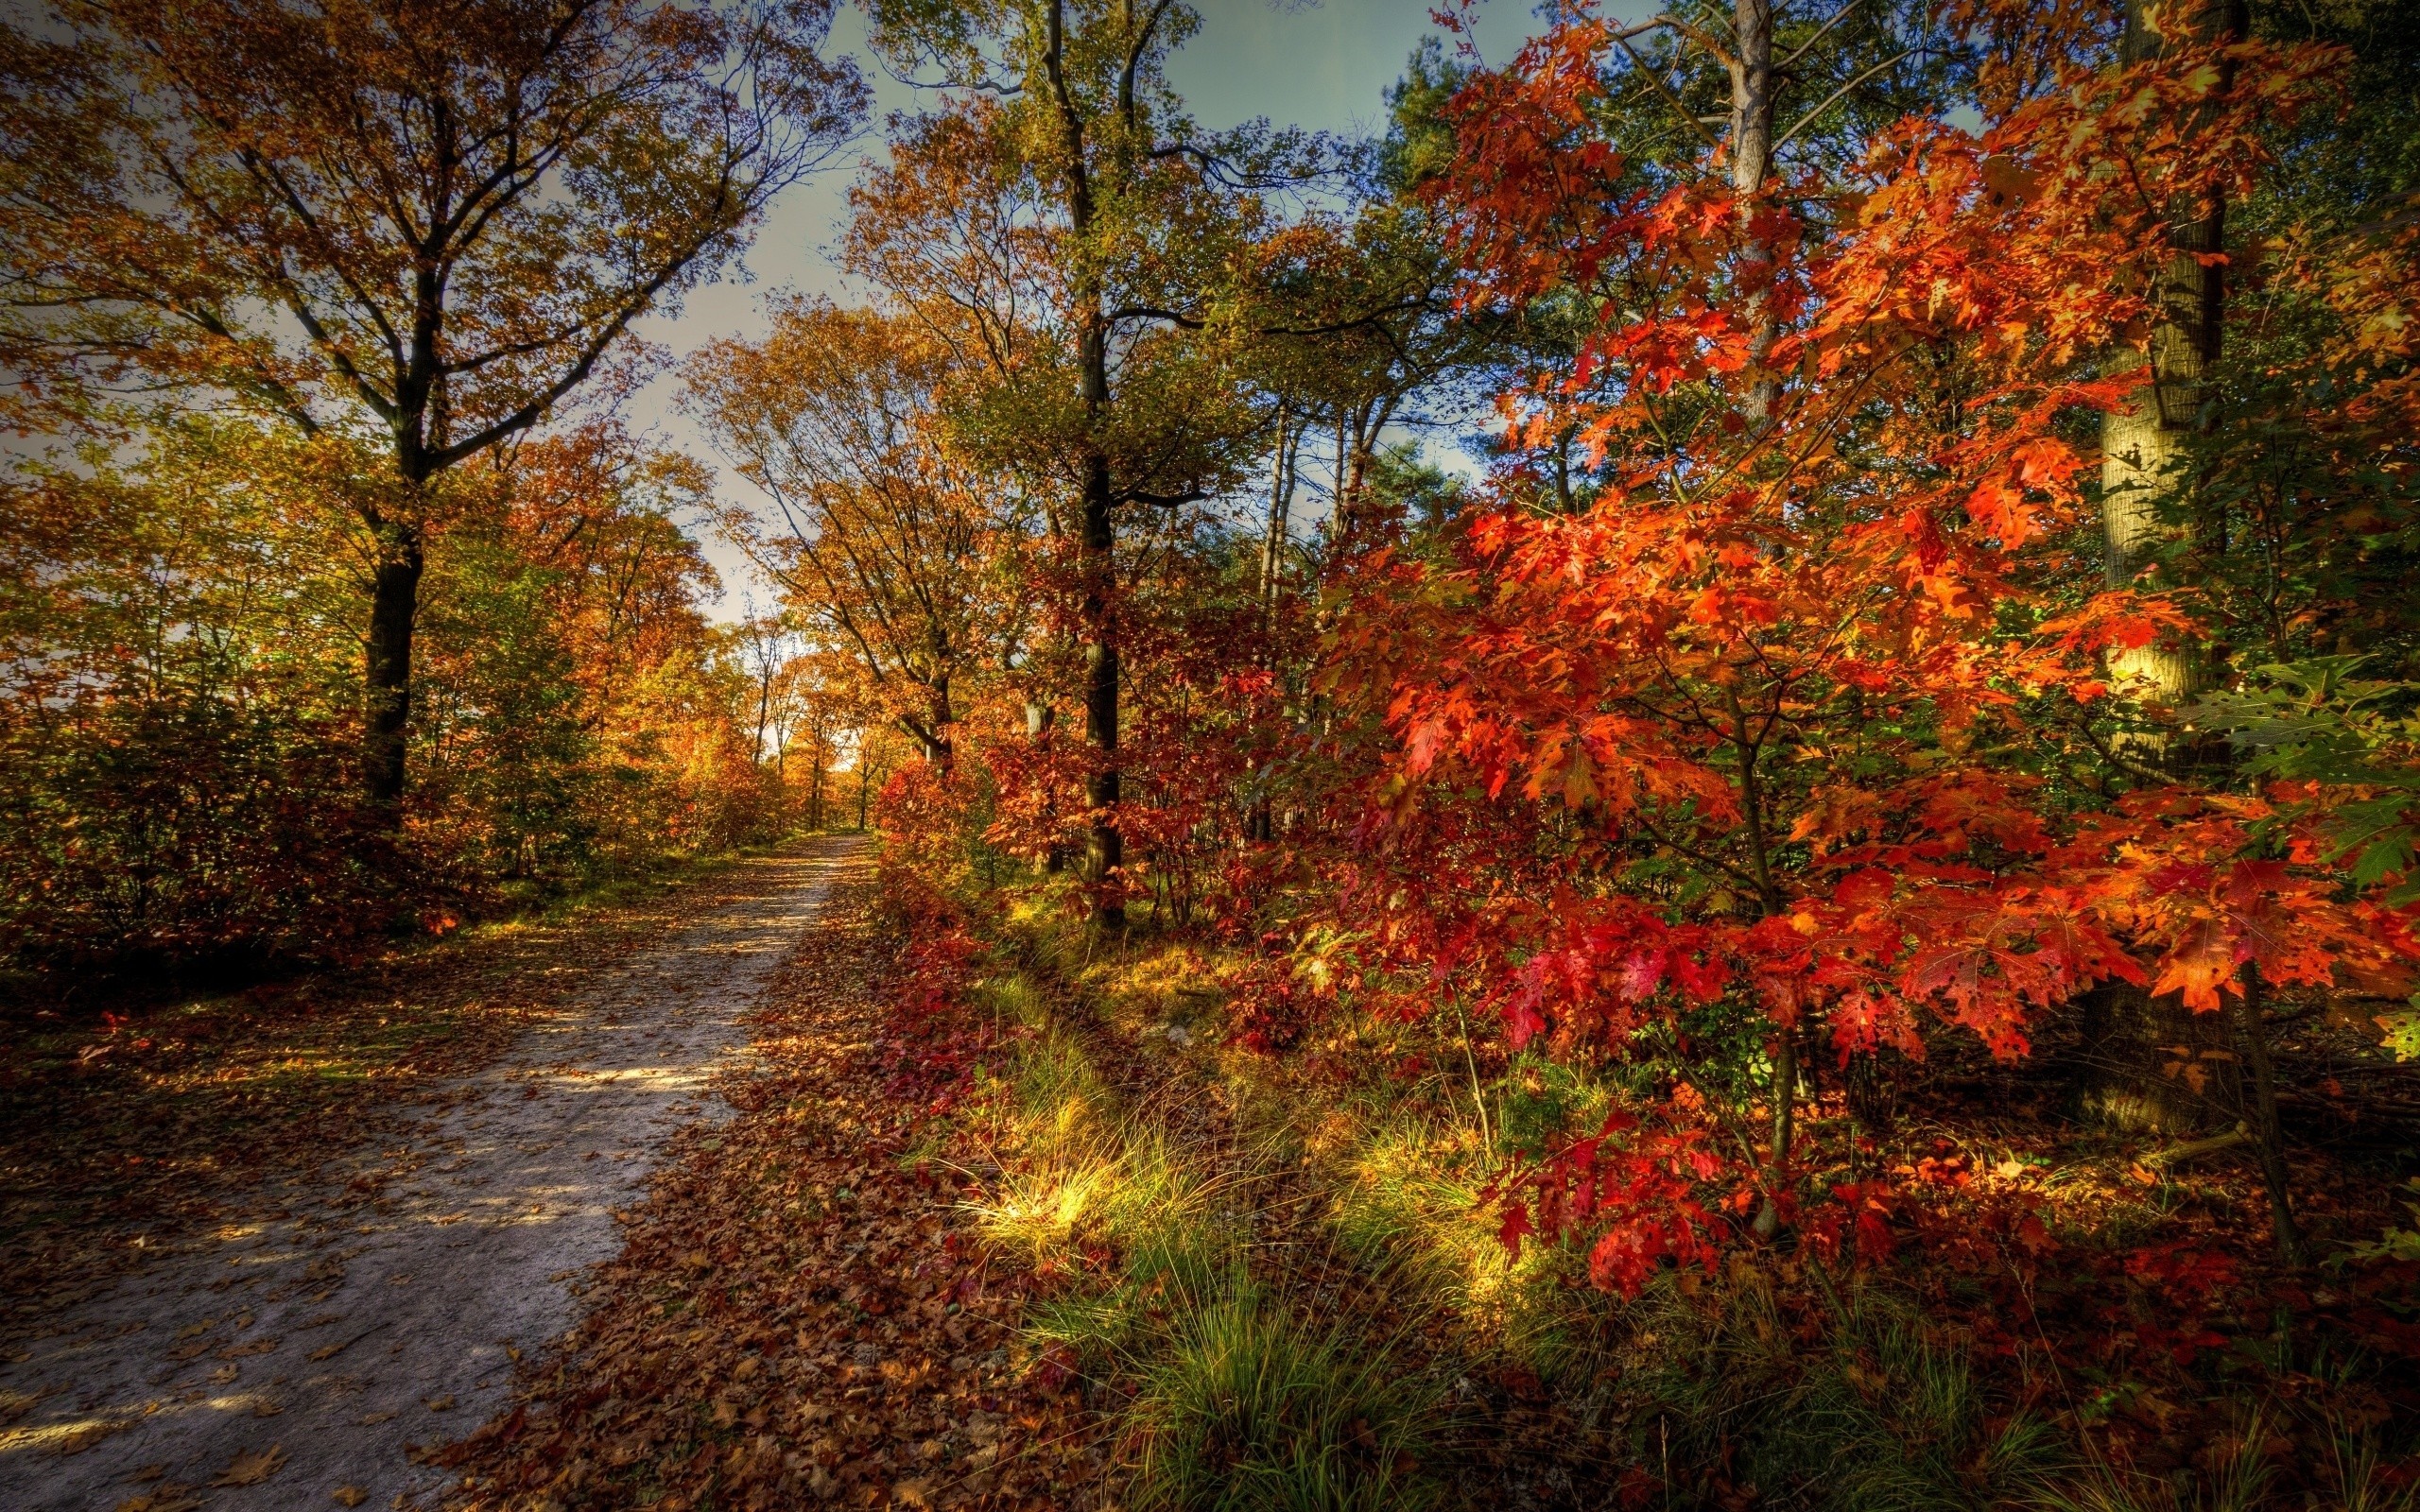 General 2560x1600 nature path leaves colorful trees forest fall plants